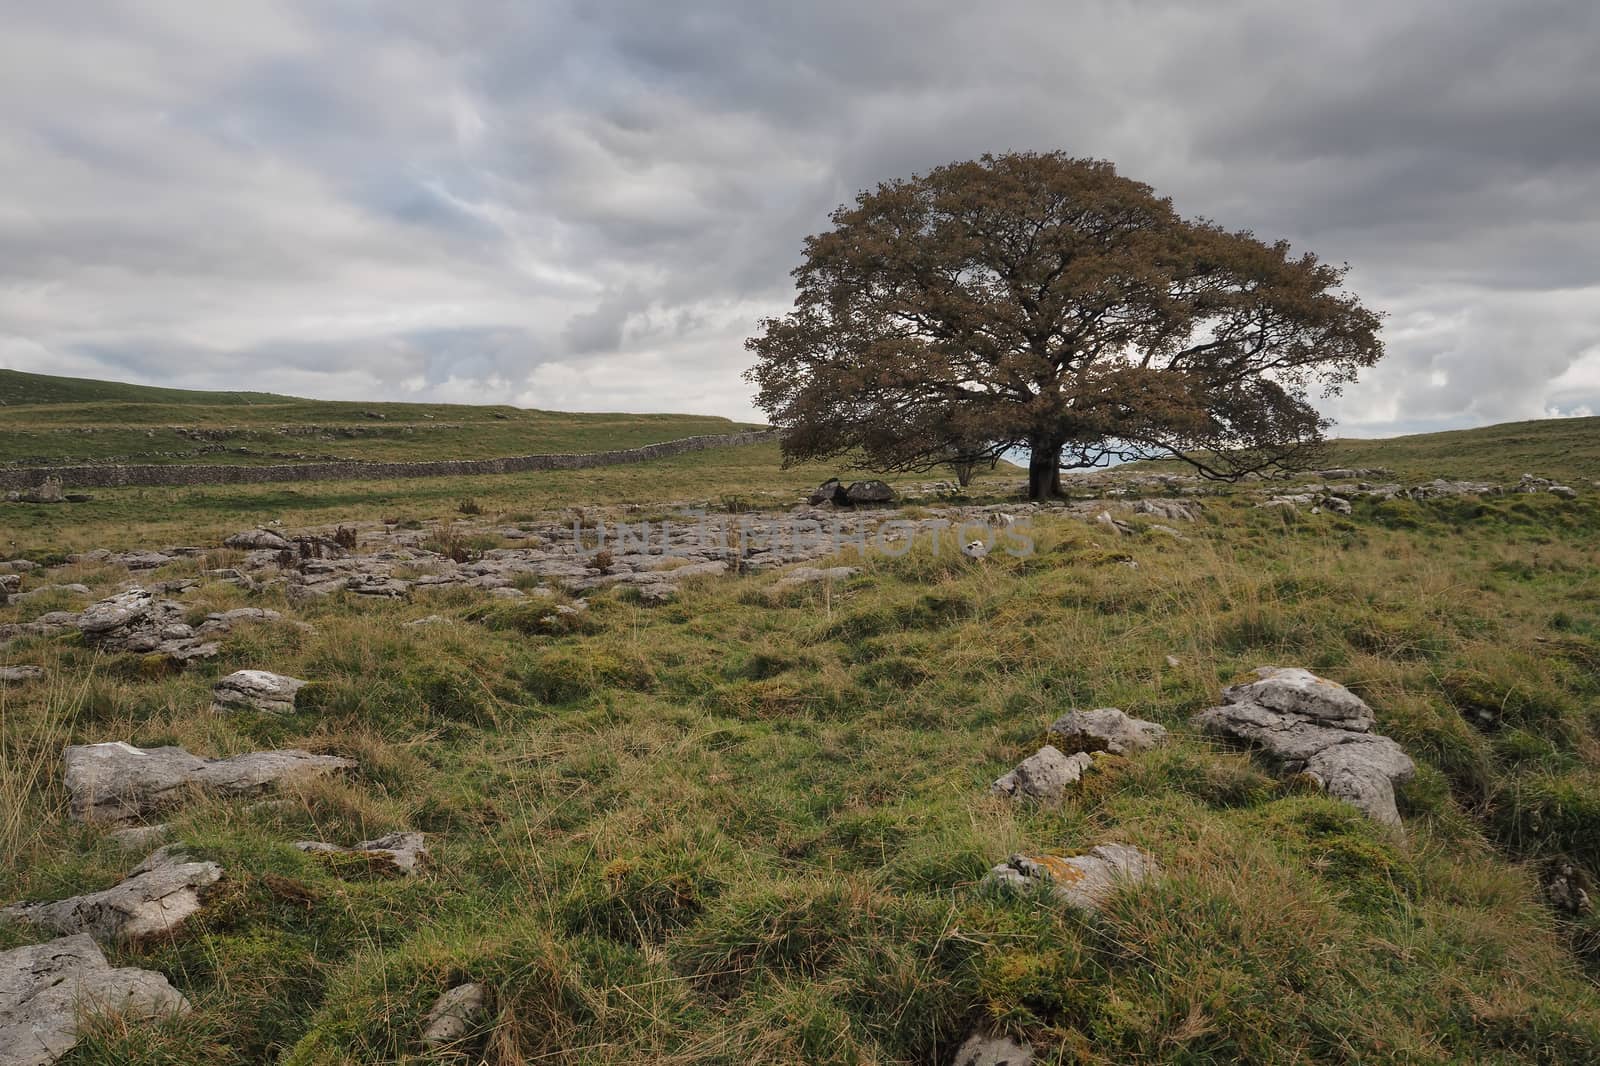 Lone tree on a limestone pavement against a moody overcast sky and a dry stone wall on the Dales Way near Grassington, Wharfedale, Yorkshire Dales, UK